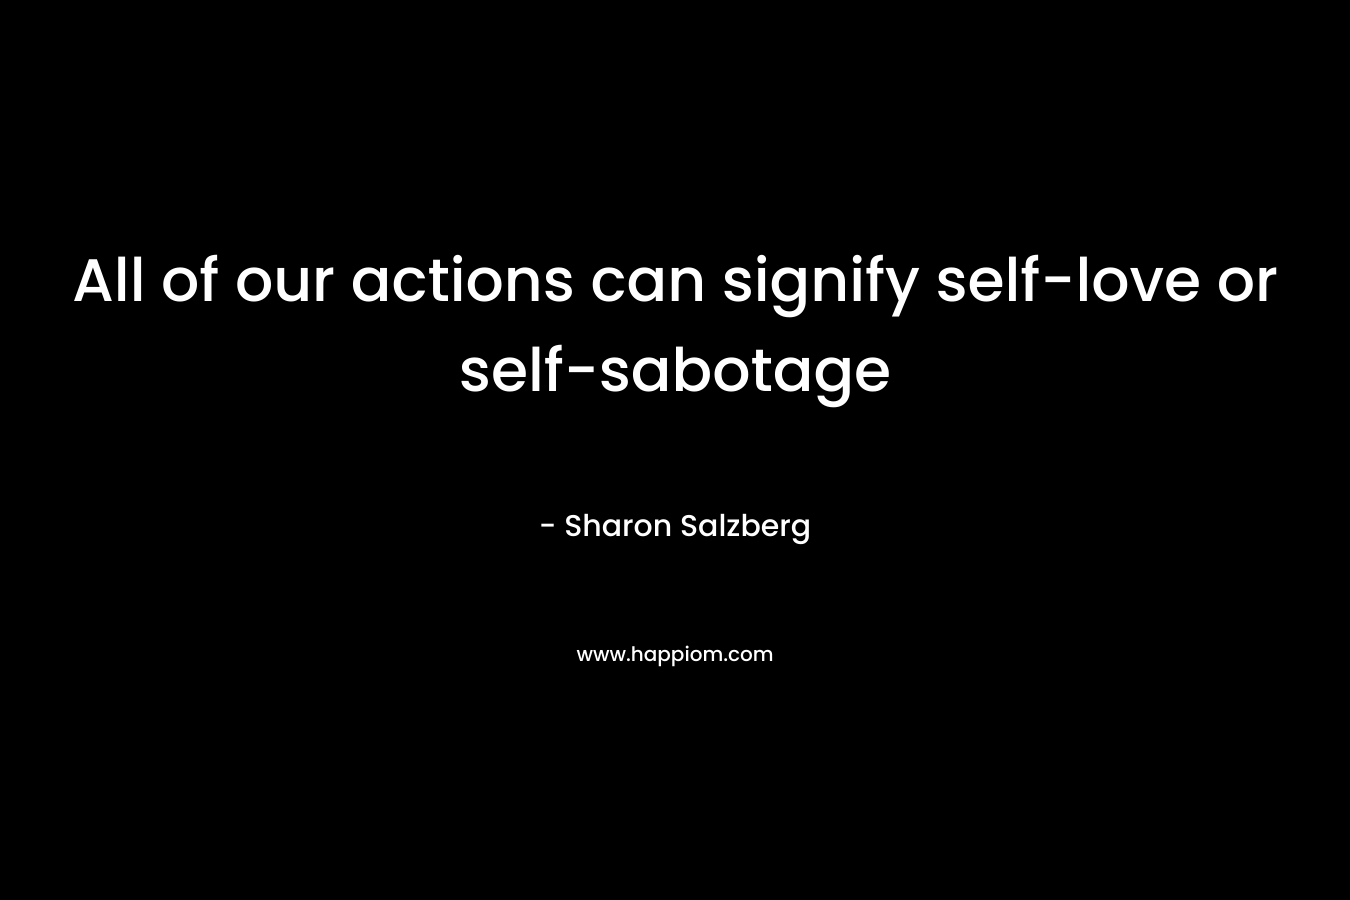 All of our actions can signify self-love or self-sabotage